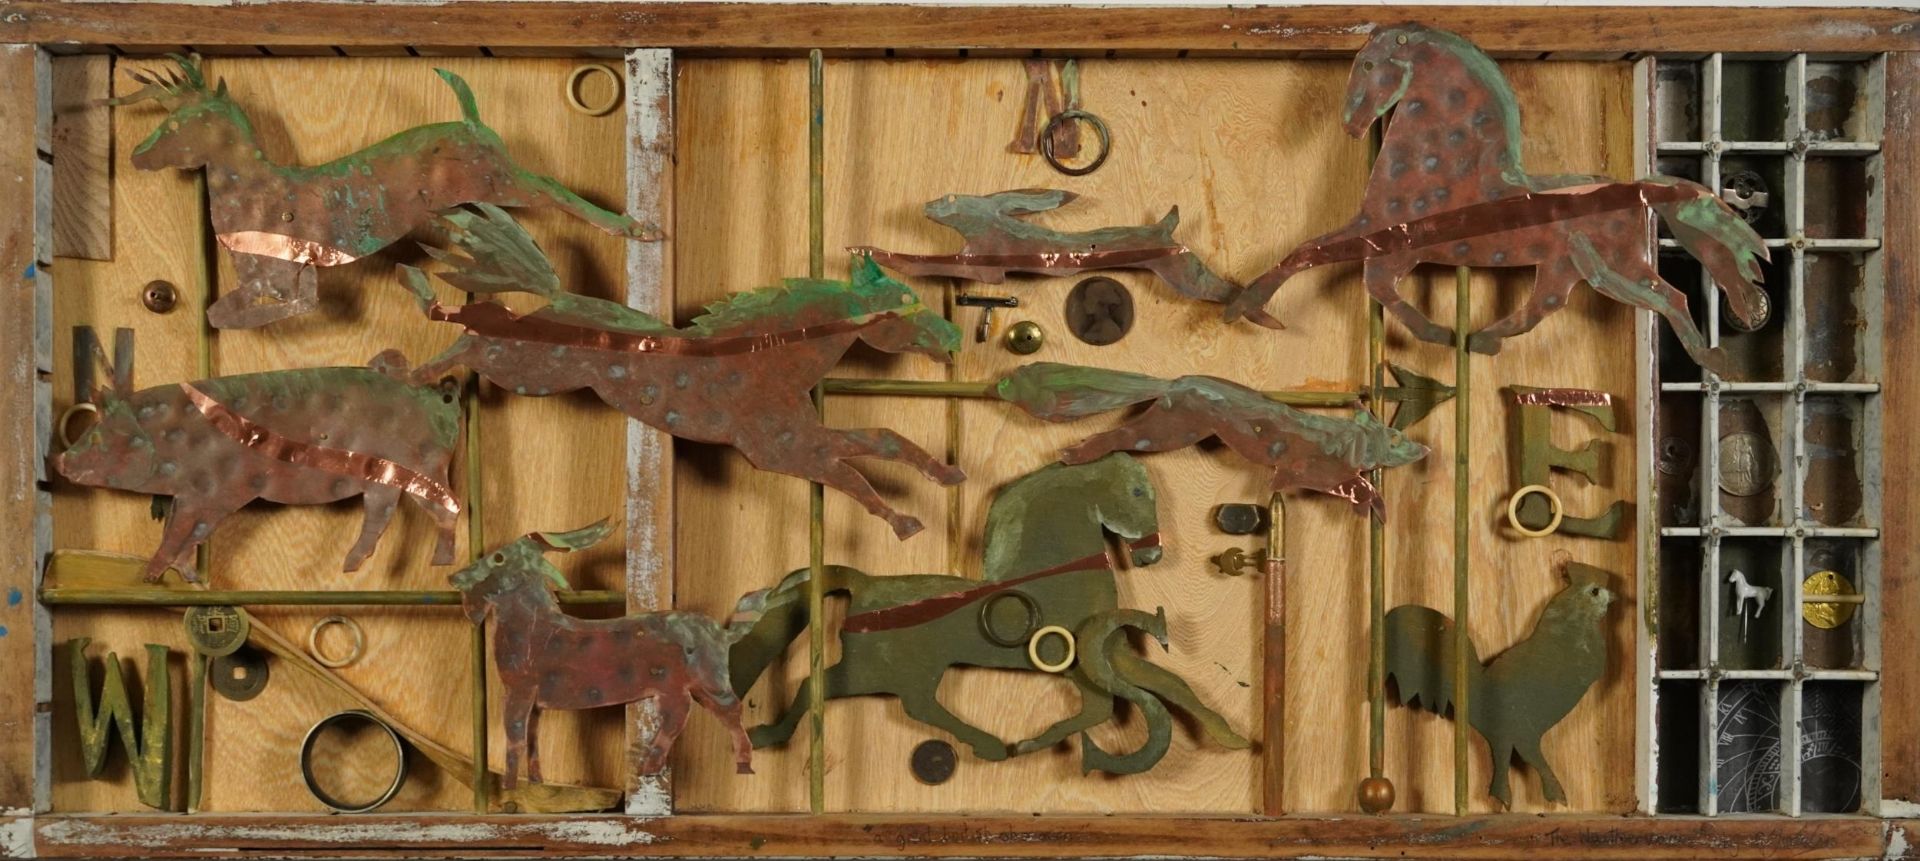 Clive Fredriksson - The Weathervane, Horses, farm animals and foxes, 3D metal and mixed media,